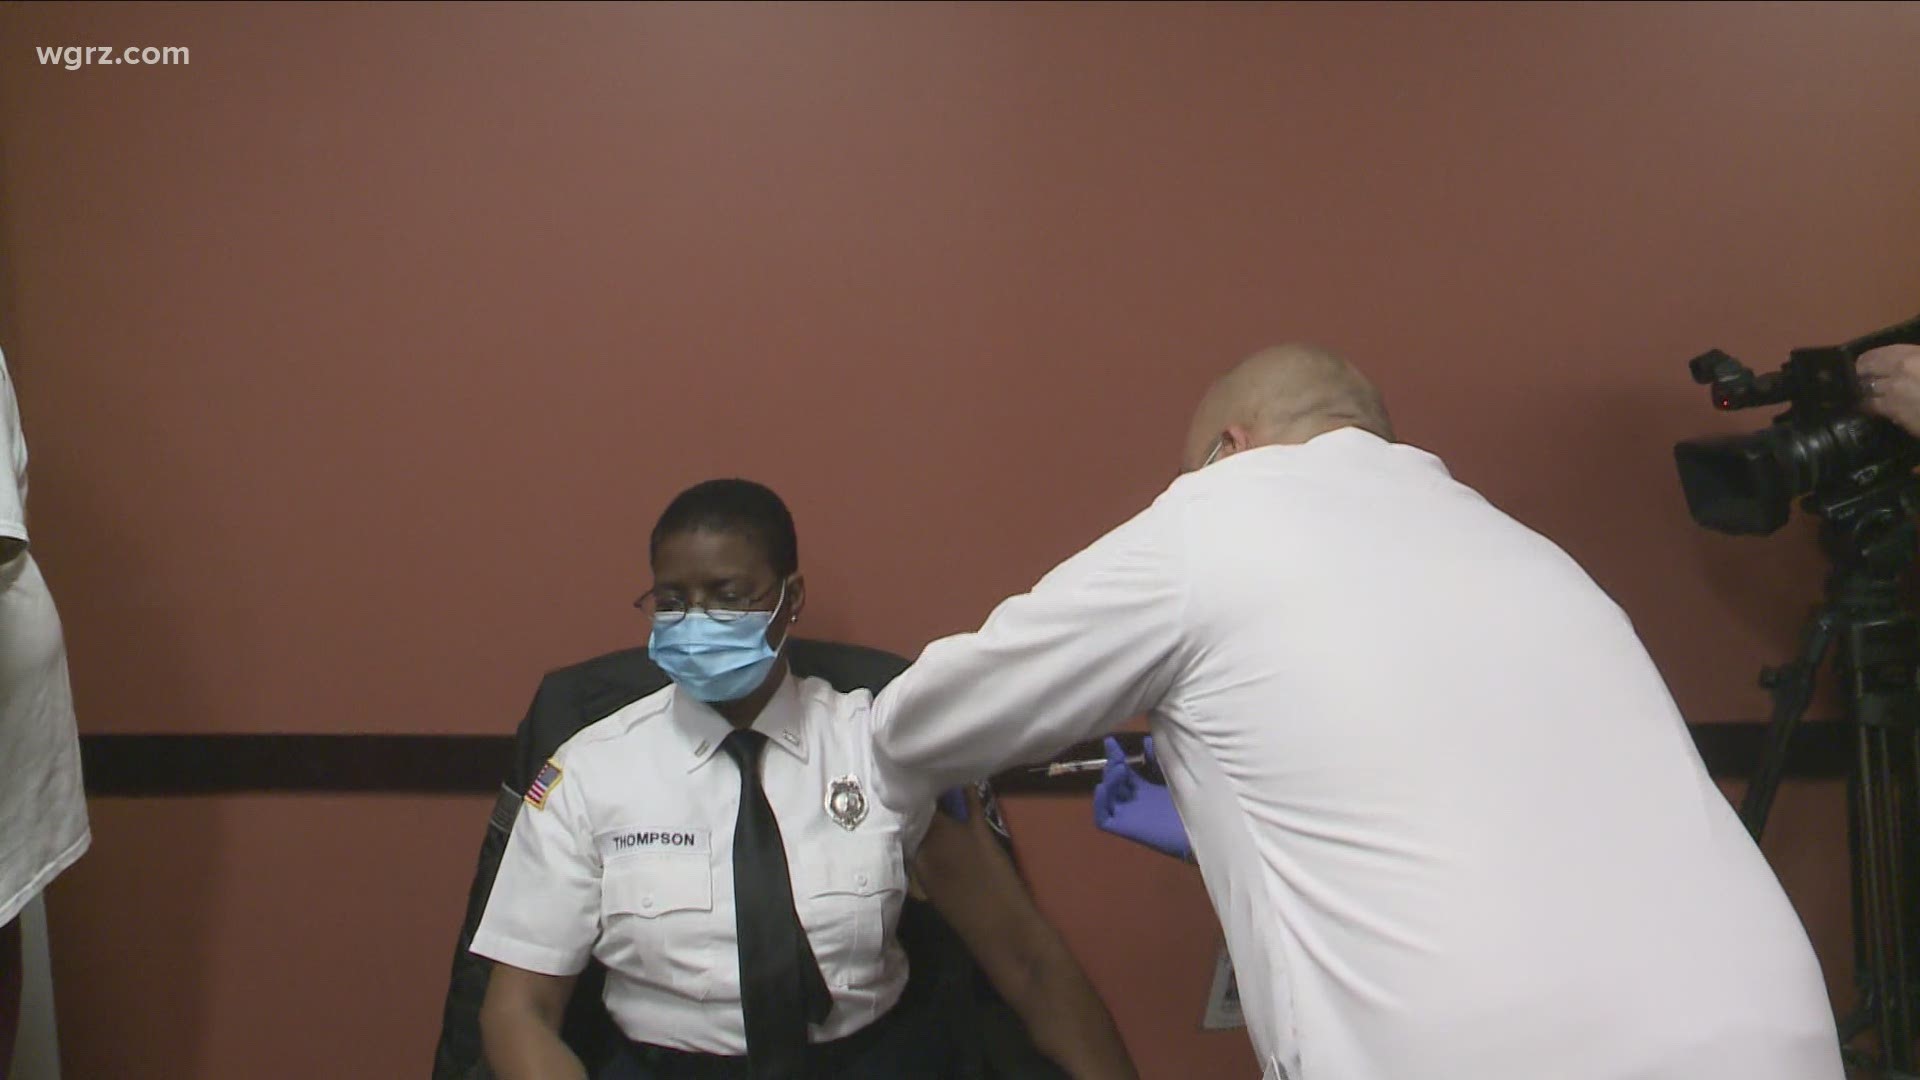 At Urban Family Practice on Buffalo's West Side, Buffalo Fire higher ups got the Moderna vaccine. 
The department has been in the process of vaccinating firefighters